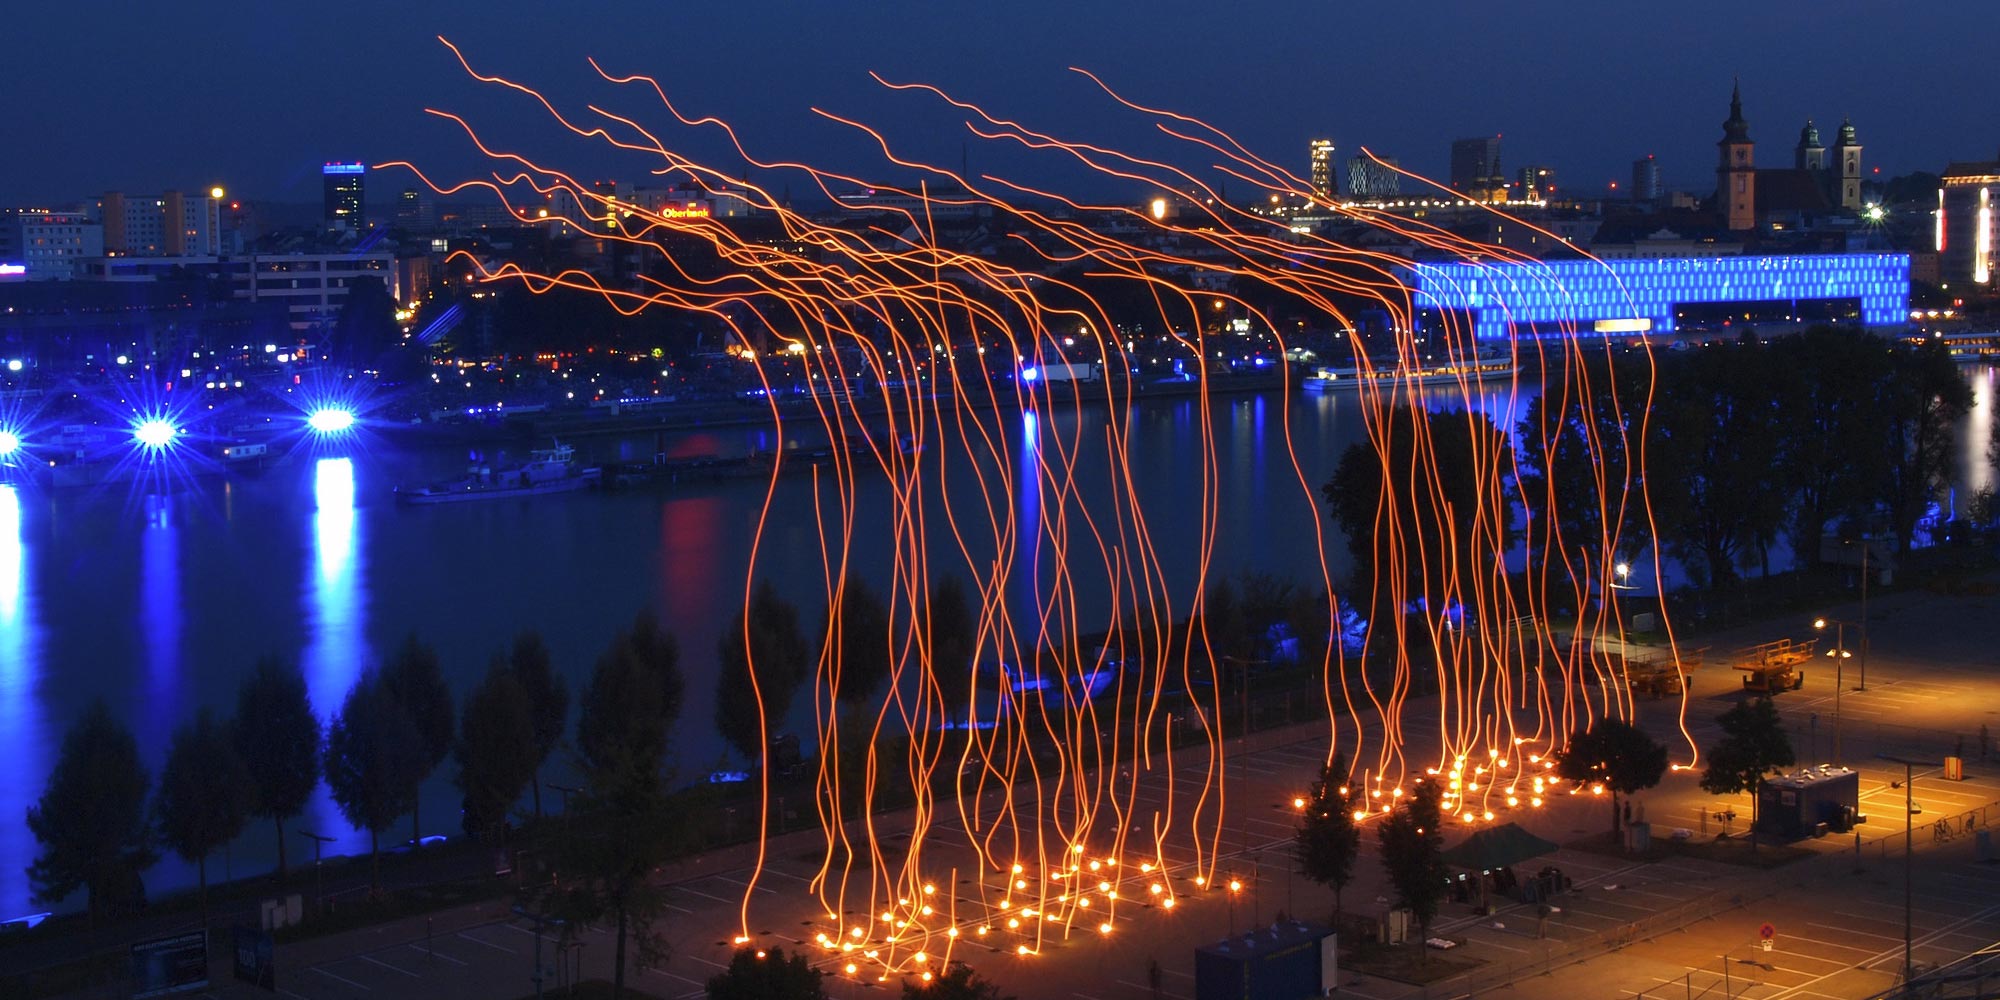 Ars Electronica Spaxels over Linz